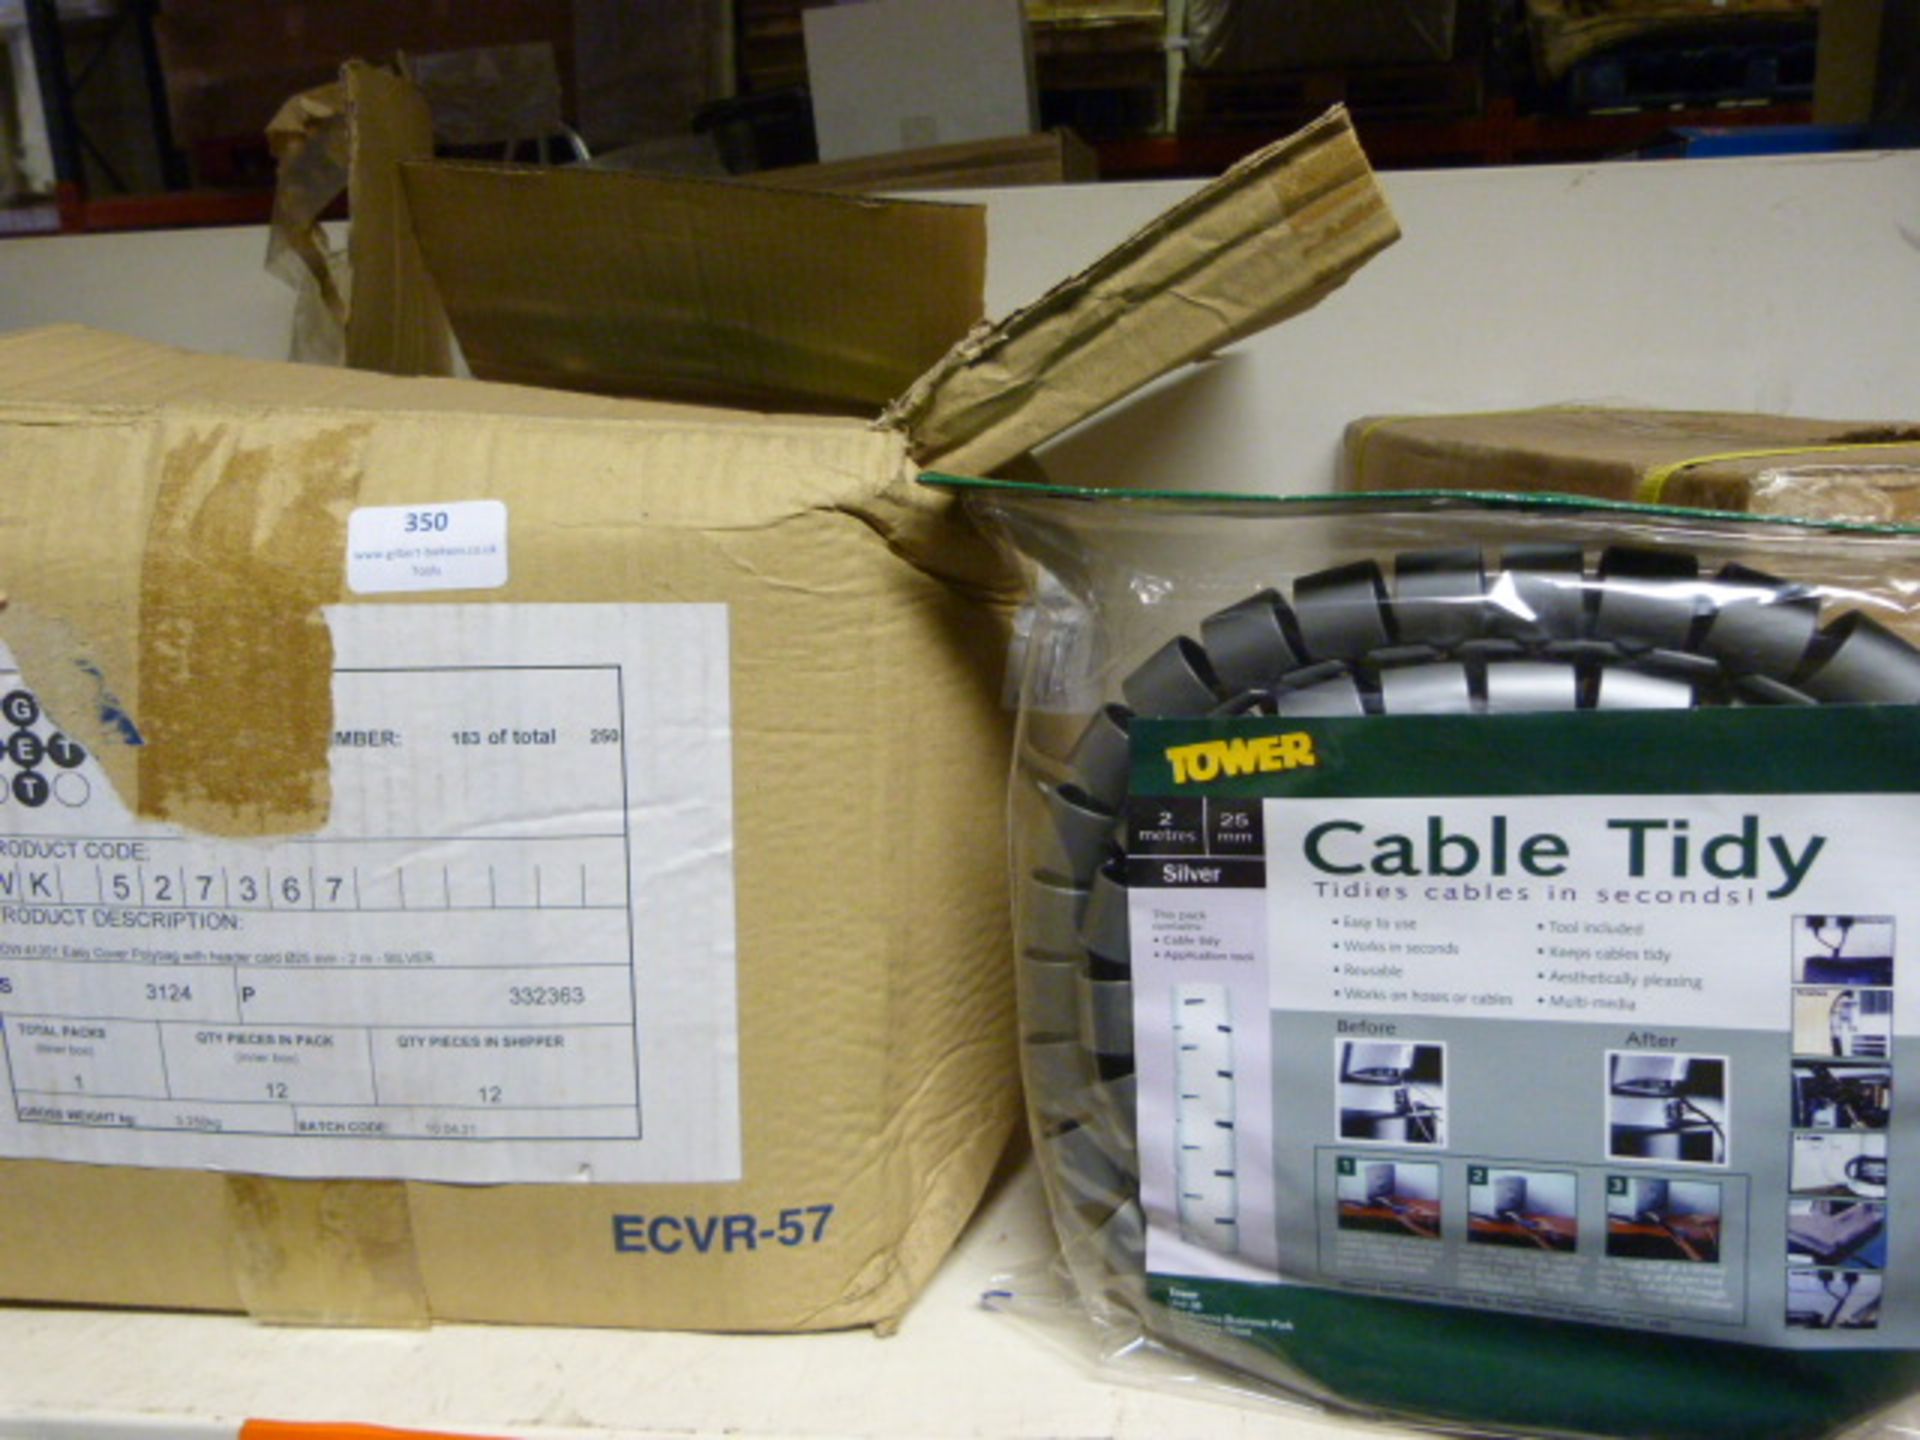 Box of 12 2m Cable Tidies